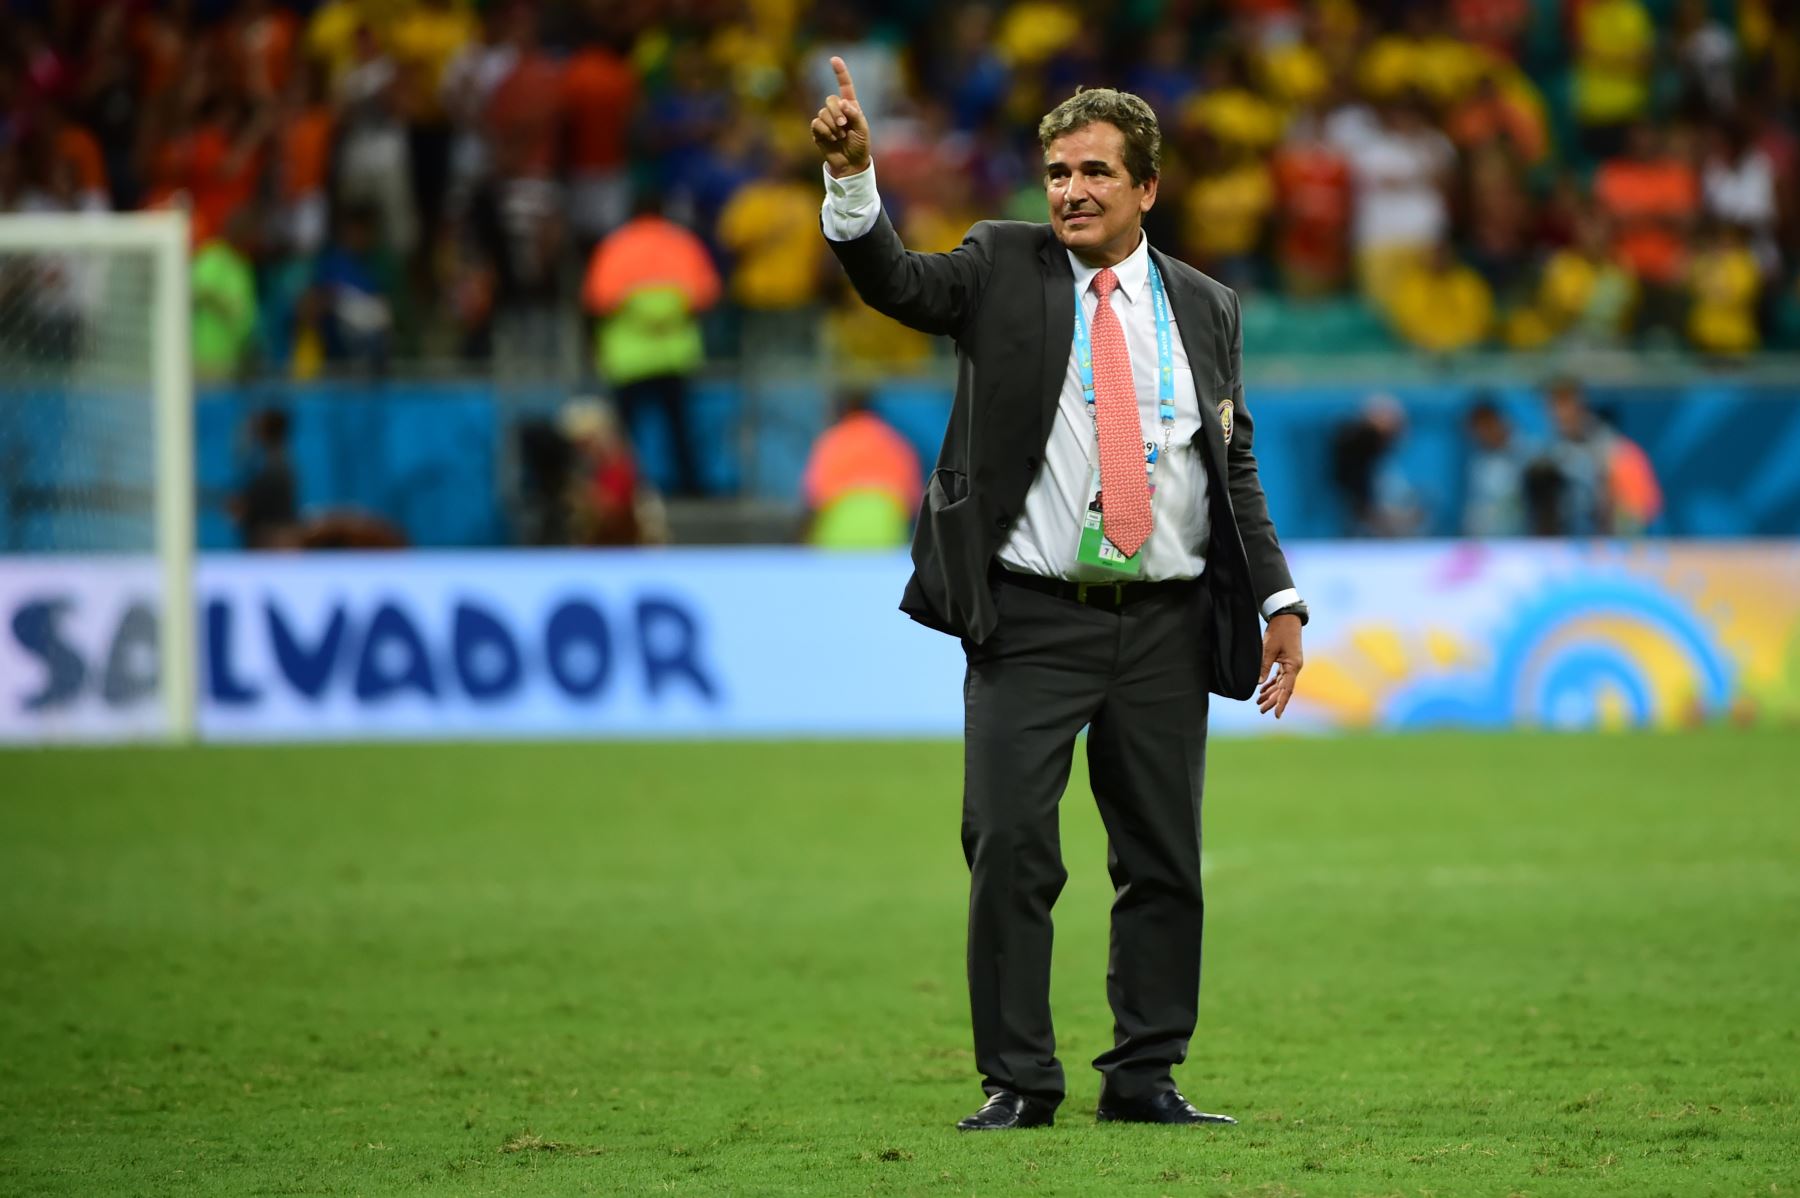 Jorge Luis Pinto reached World Cup quarter-final stage with Costa Rica